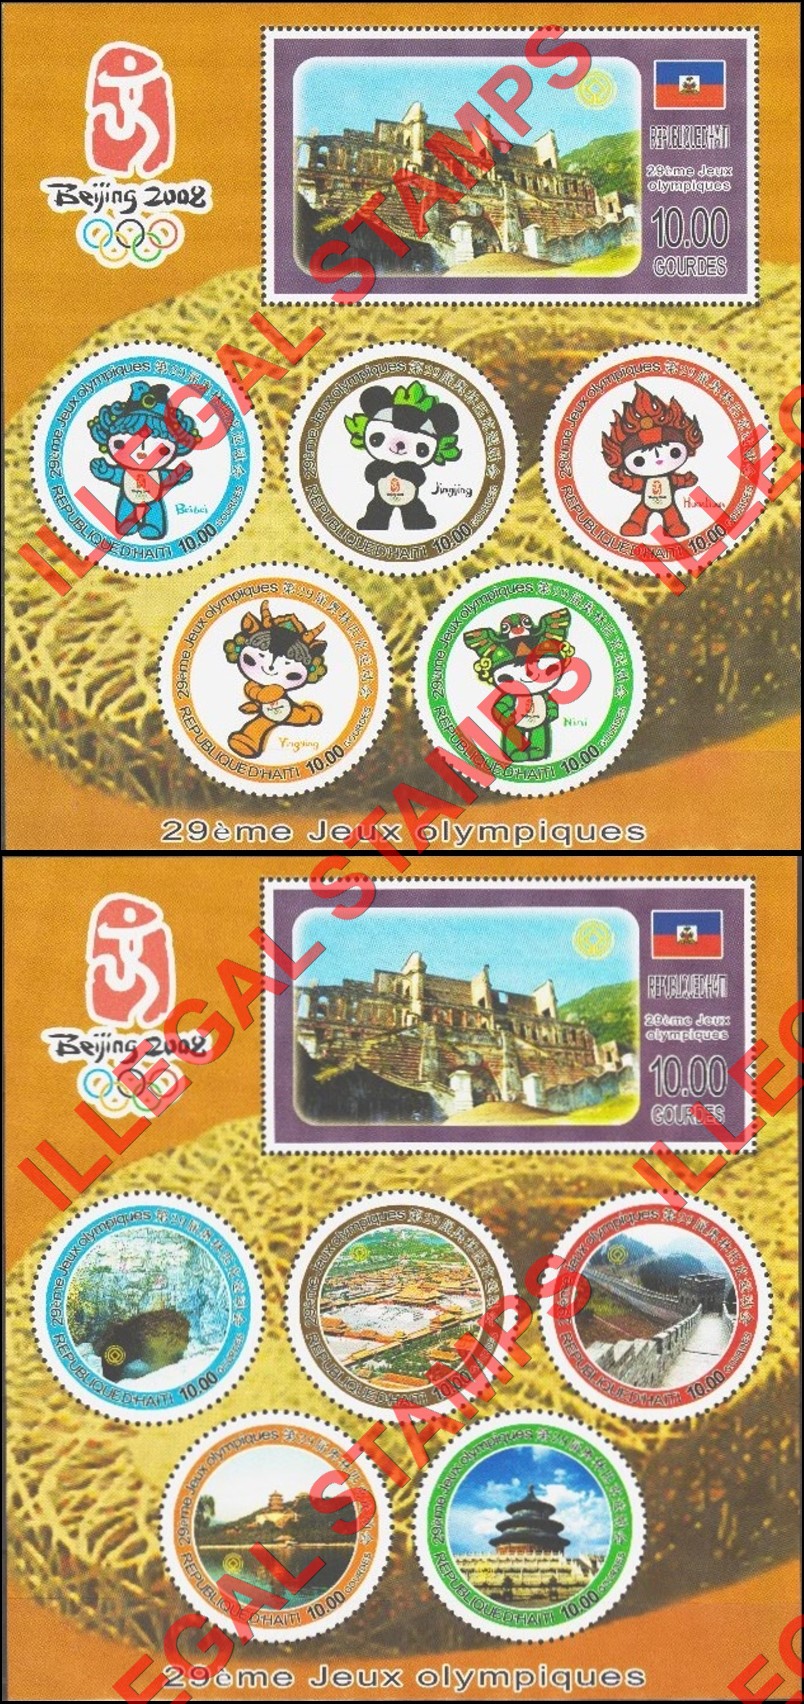 Haiti 2007 Olympic Games in Beijing 2008 Illegal Stamp Souvenir Sheets of 6 with Circle Designed Stamps